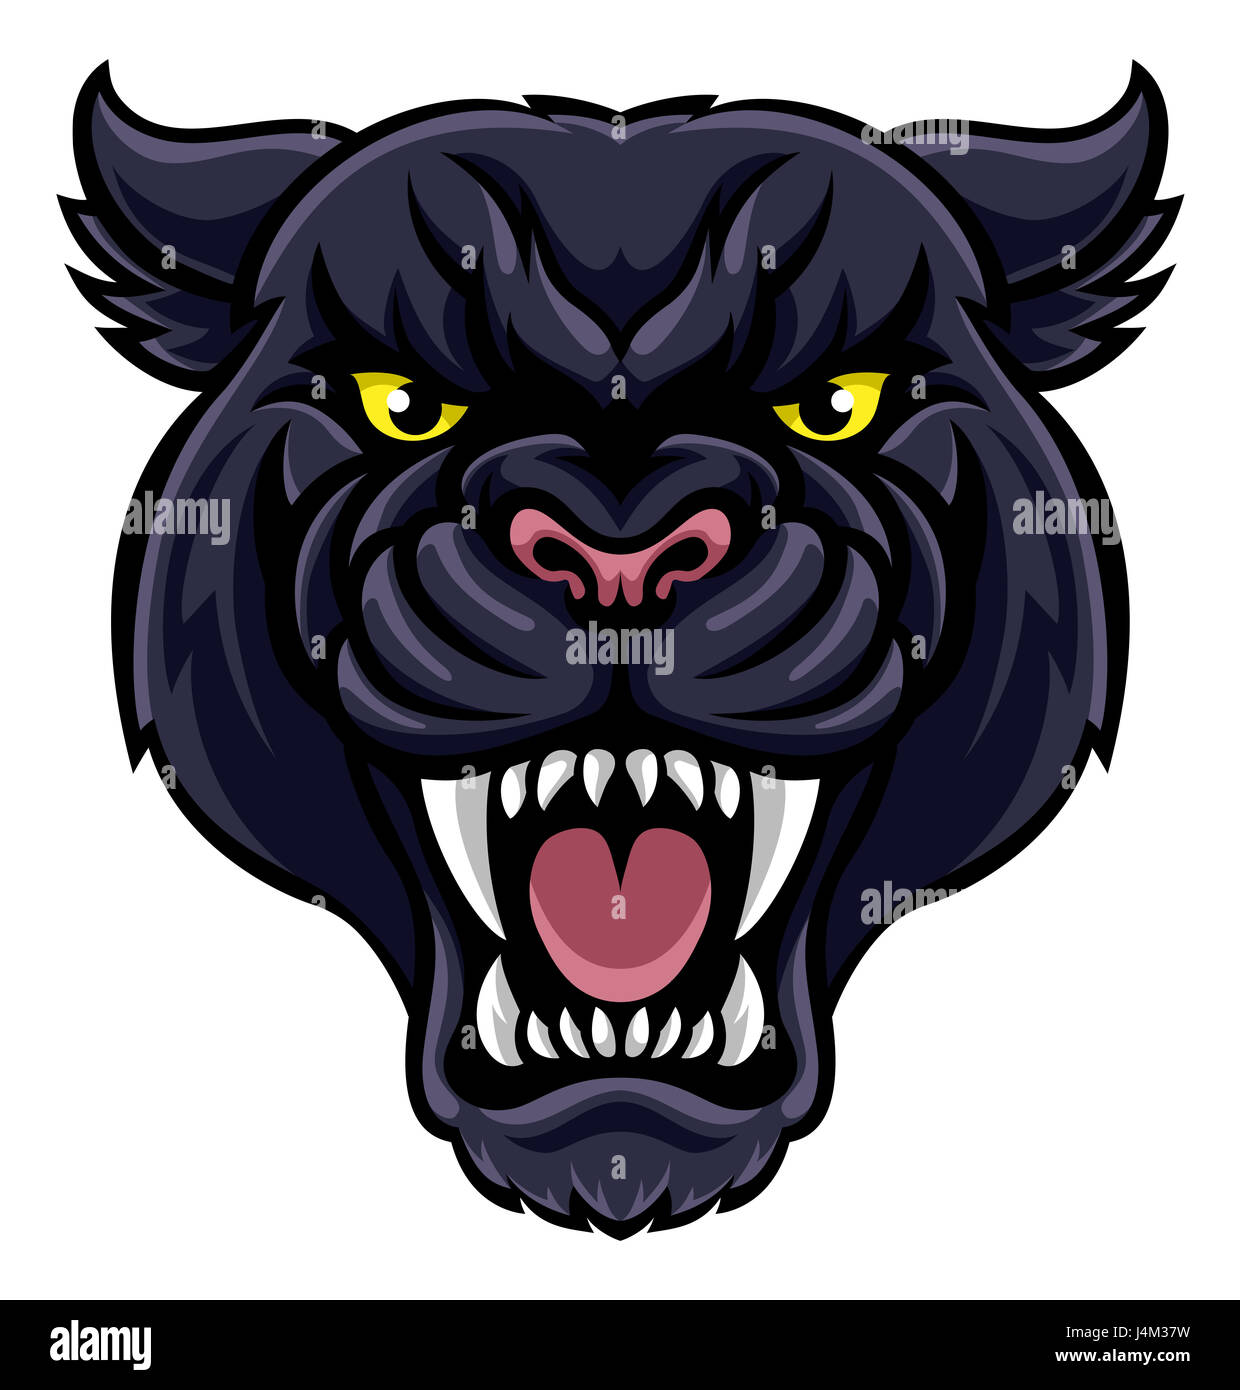 An angry looking black panther mascot animal character Stock Photo - Alamy